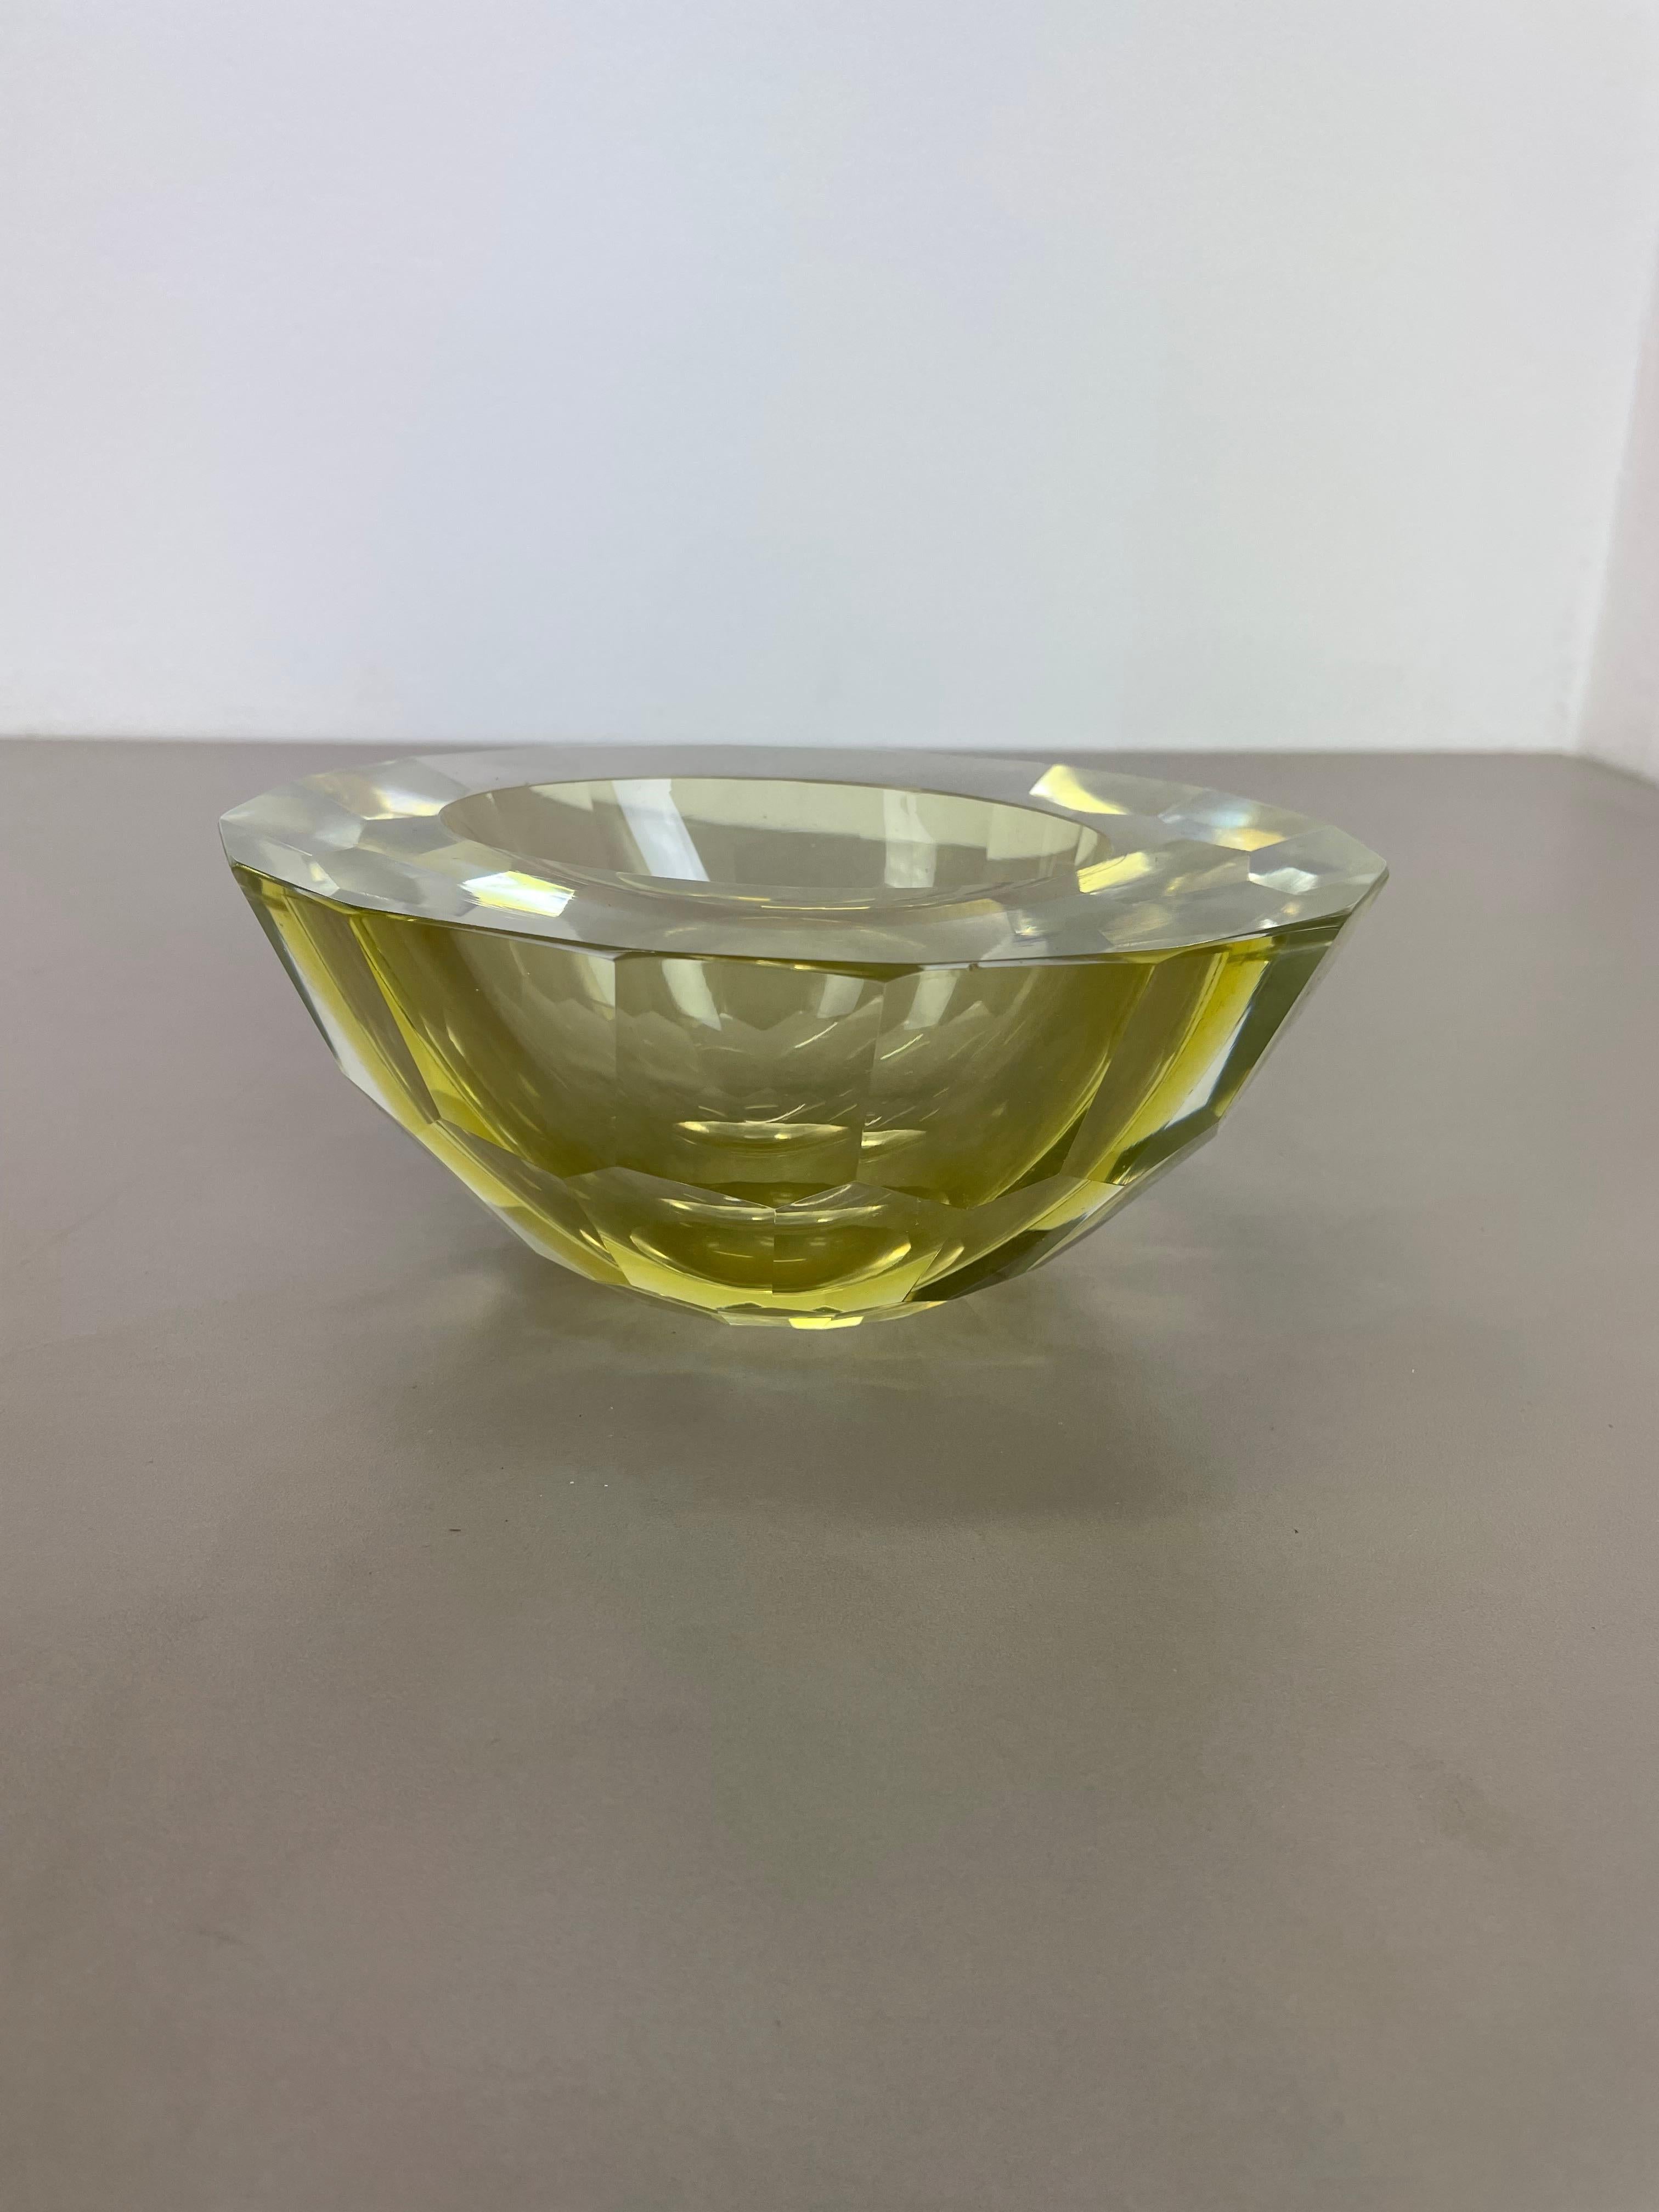 XL 2.4kg Murano Glass Sommerso yellow DIAMOND Bowl Flavio Poli, Italy, 1970s In Good Condition For Sale In Kirchlengern, DE